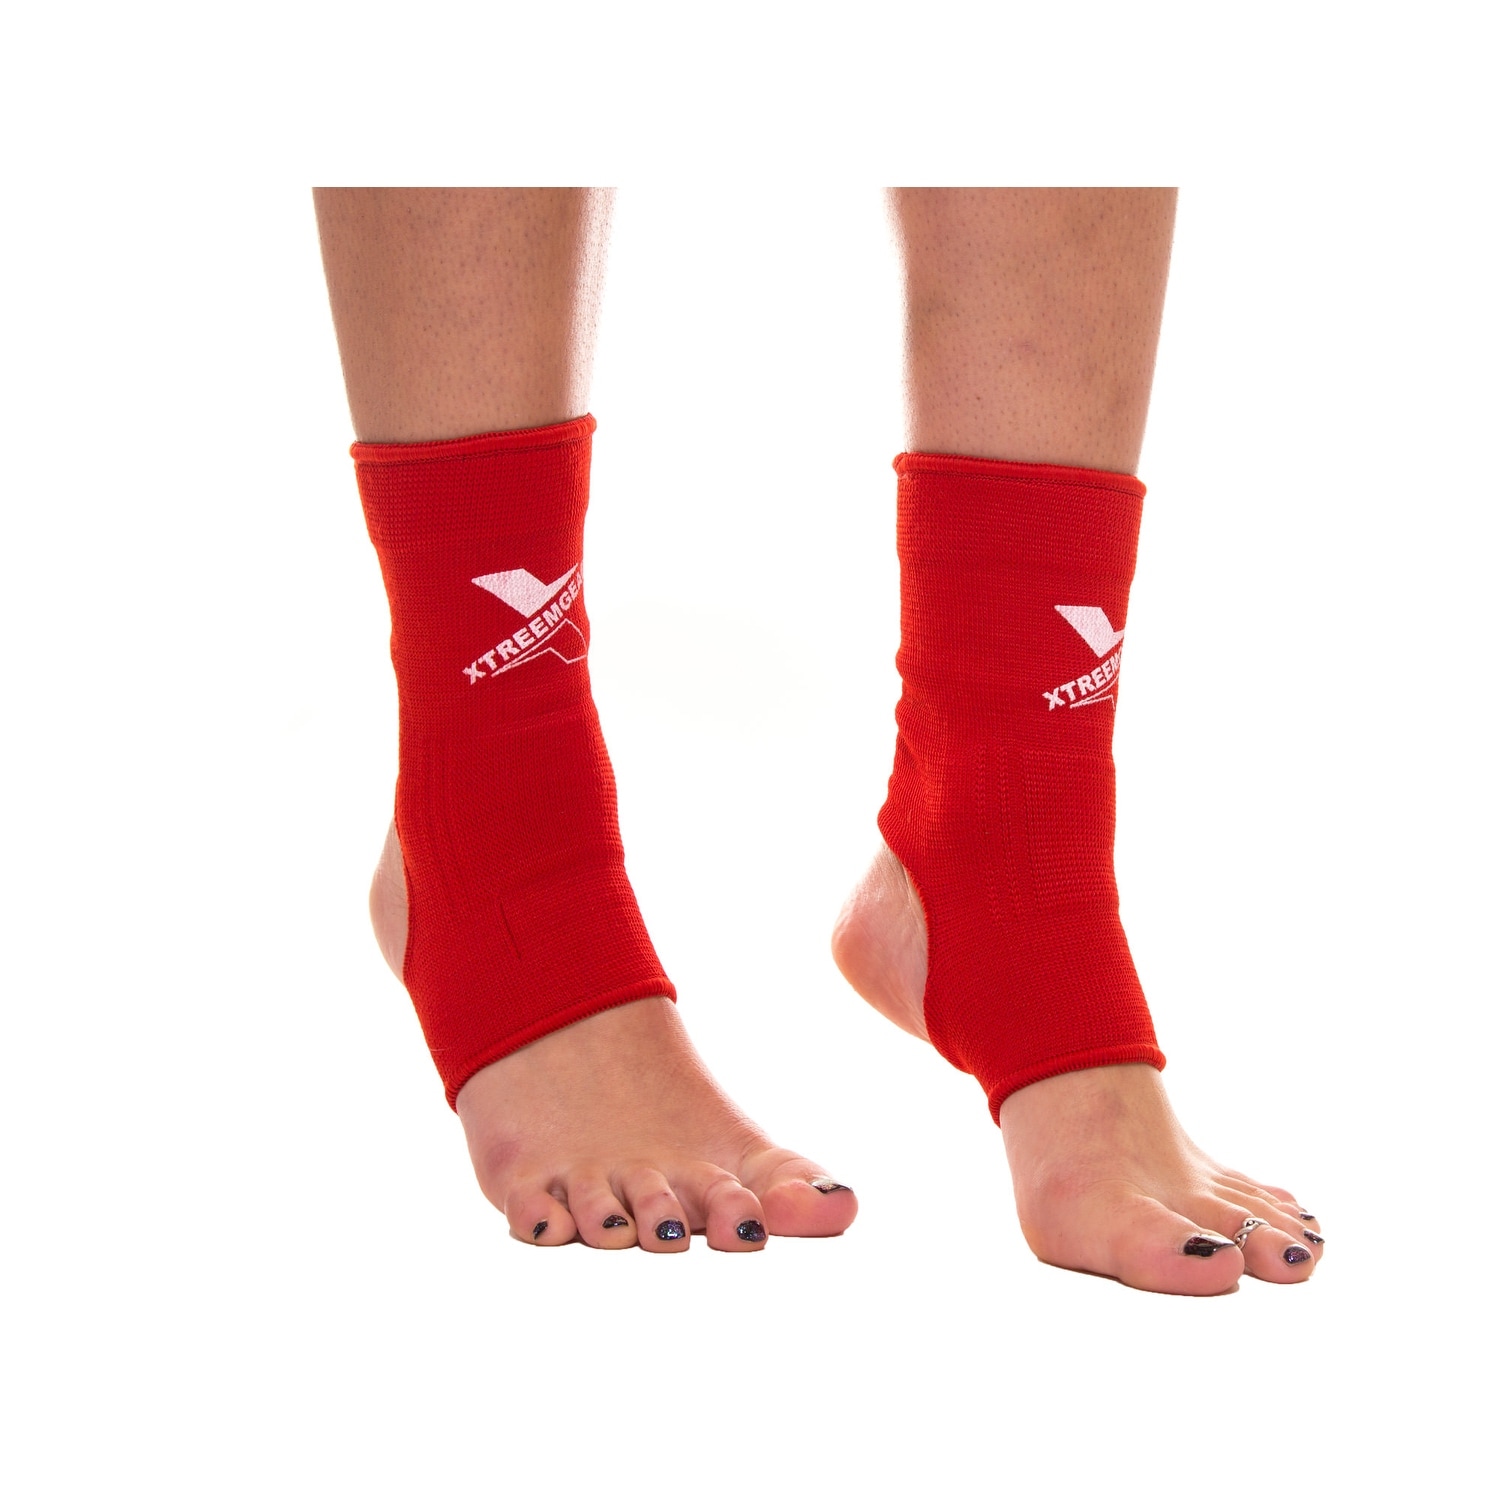 Ankle Supports Muay Thai Compression Kick Boxing Wraps Gym Socks